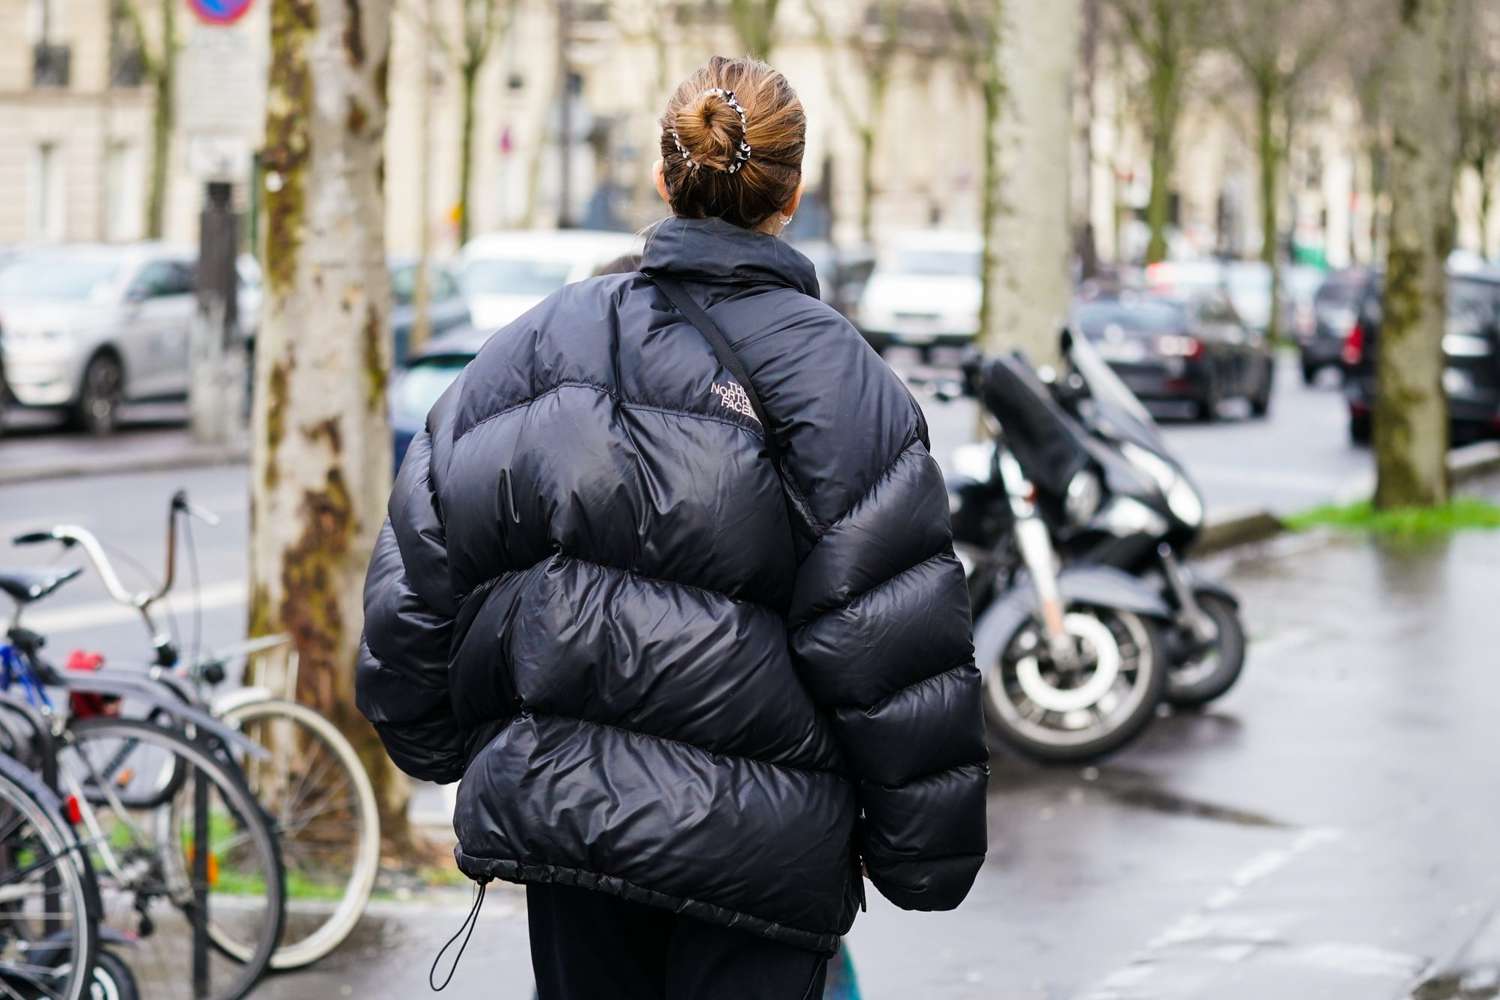 Winter coats and jackets: Fashionable It for Every Occasion